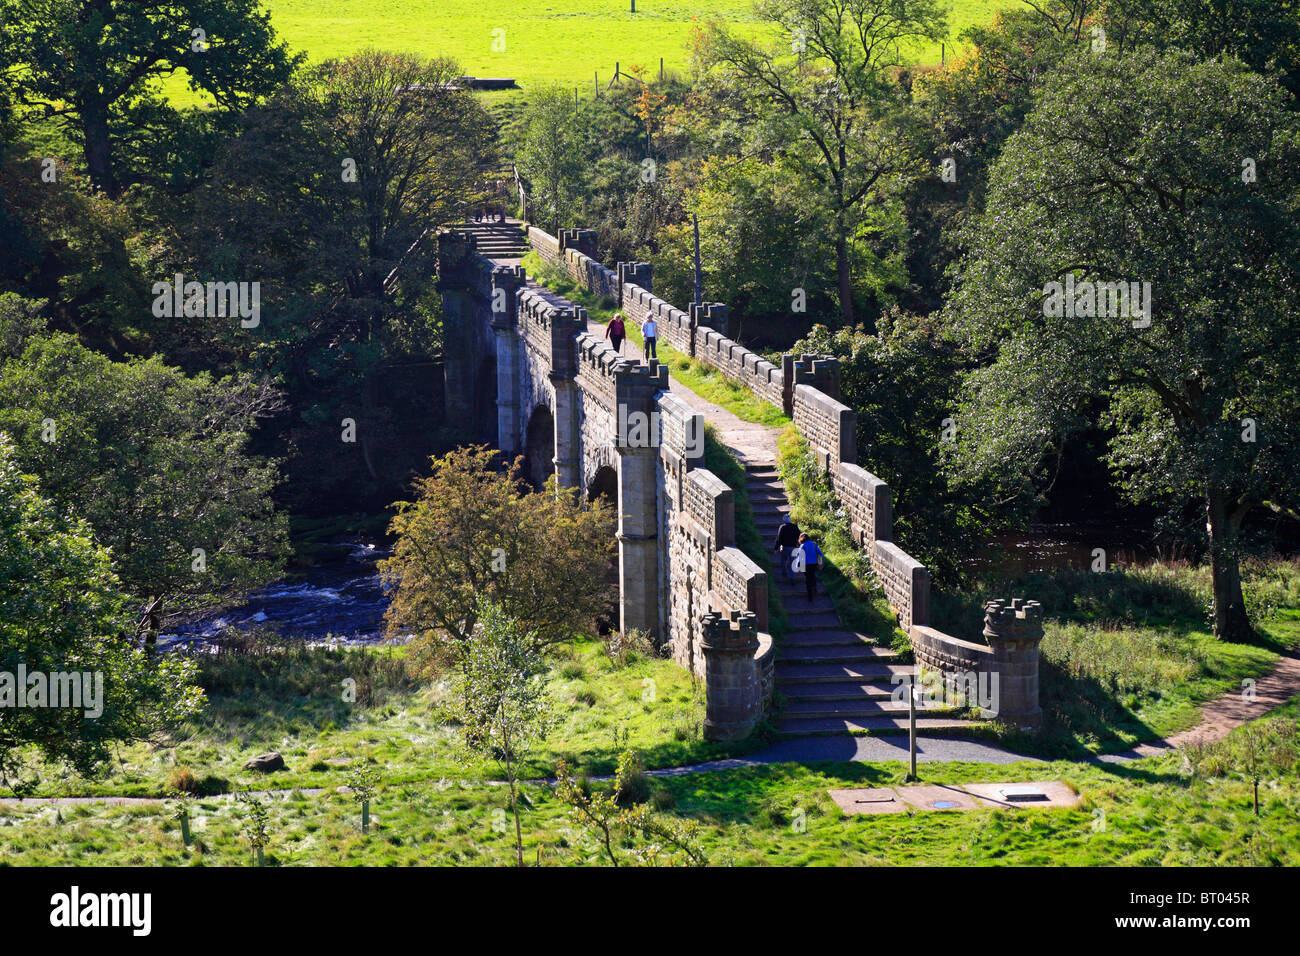 Walkers on Barden Bridge over the River Wharfe near Bolton Abbey, Yorkshire Dales National Park, North Yorkshire, England, UK. Stock Photo